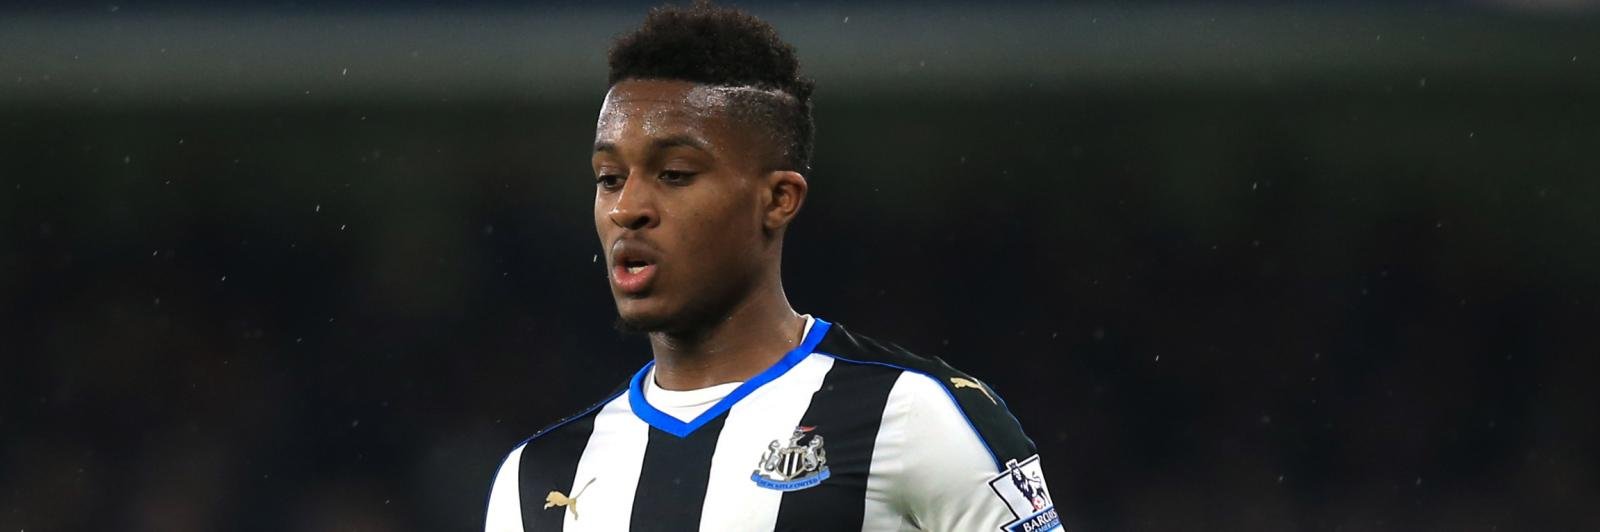 Arsenal ready to pounce for England Under-20 and Newcastle United winger